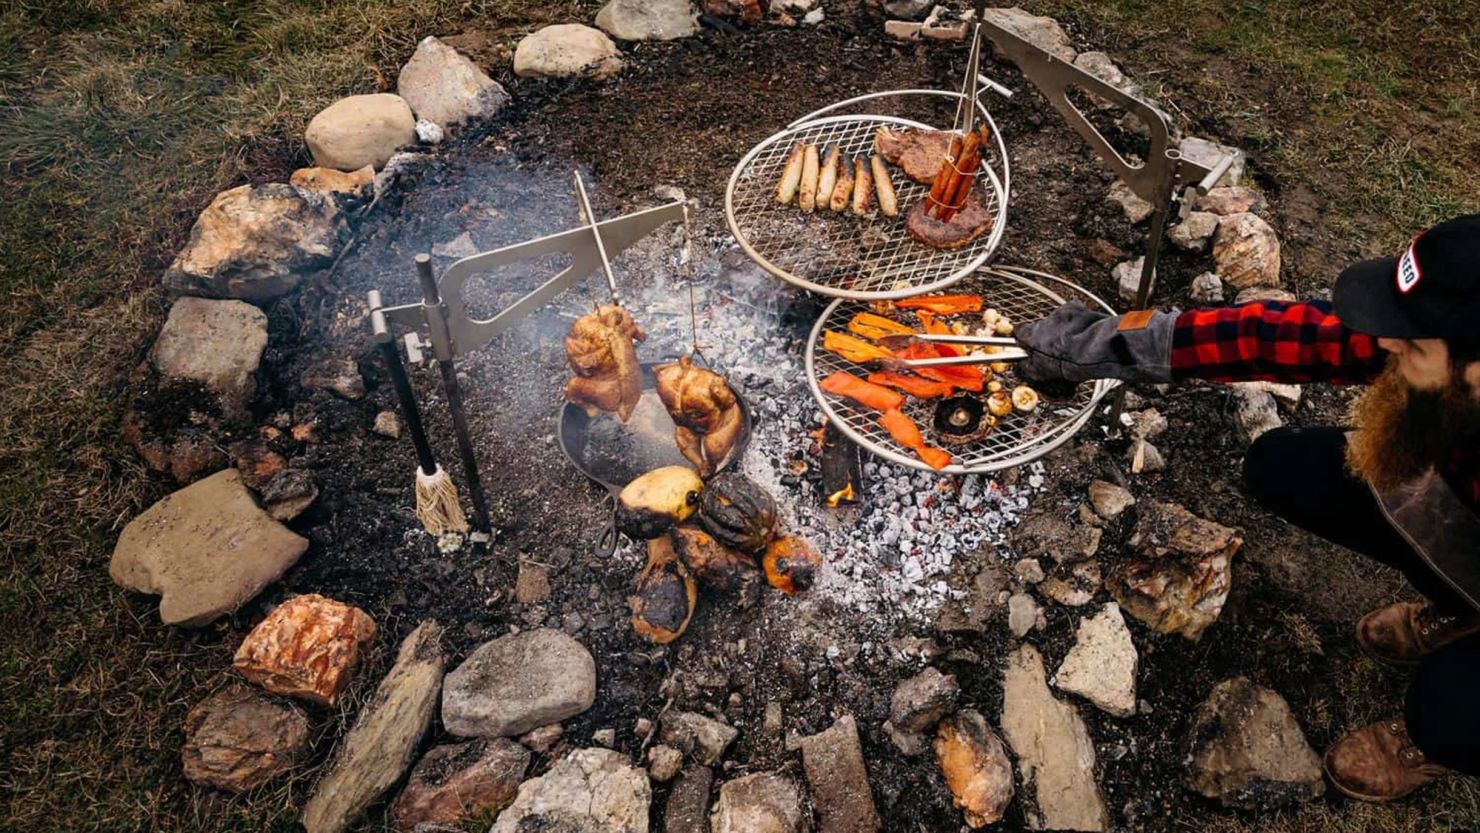 How to use a grill pan, inside or outdoors - The Washington Post